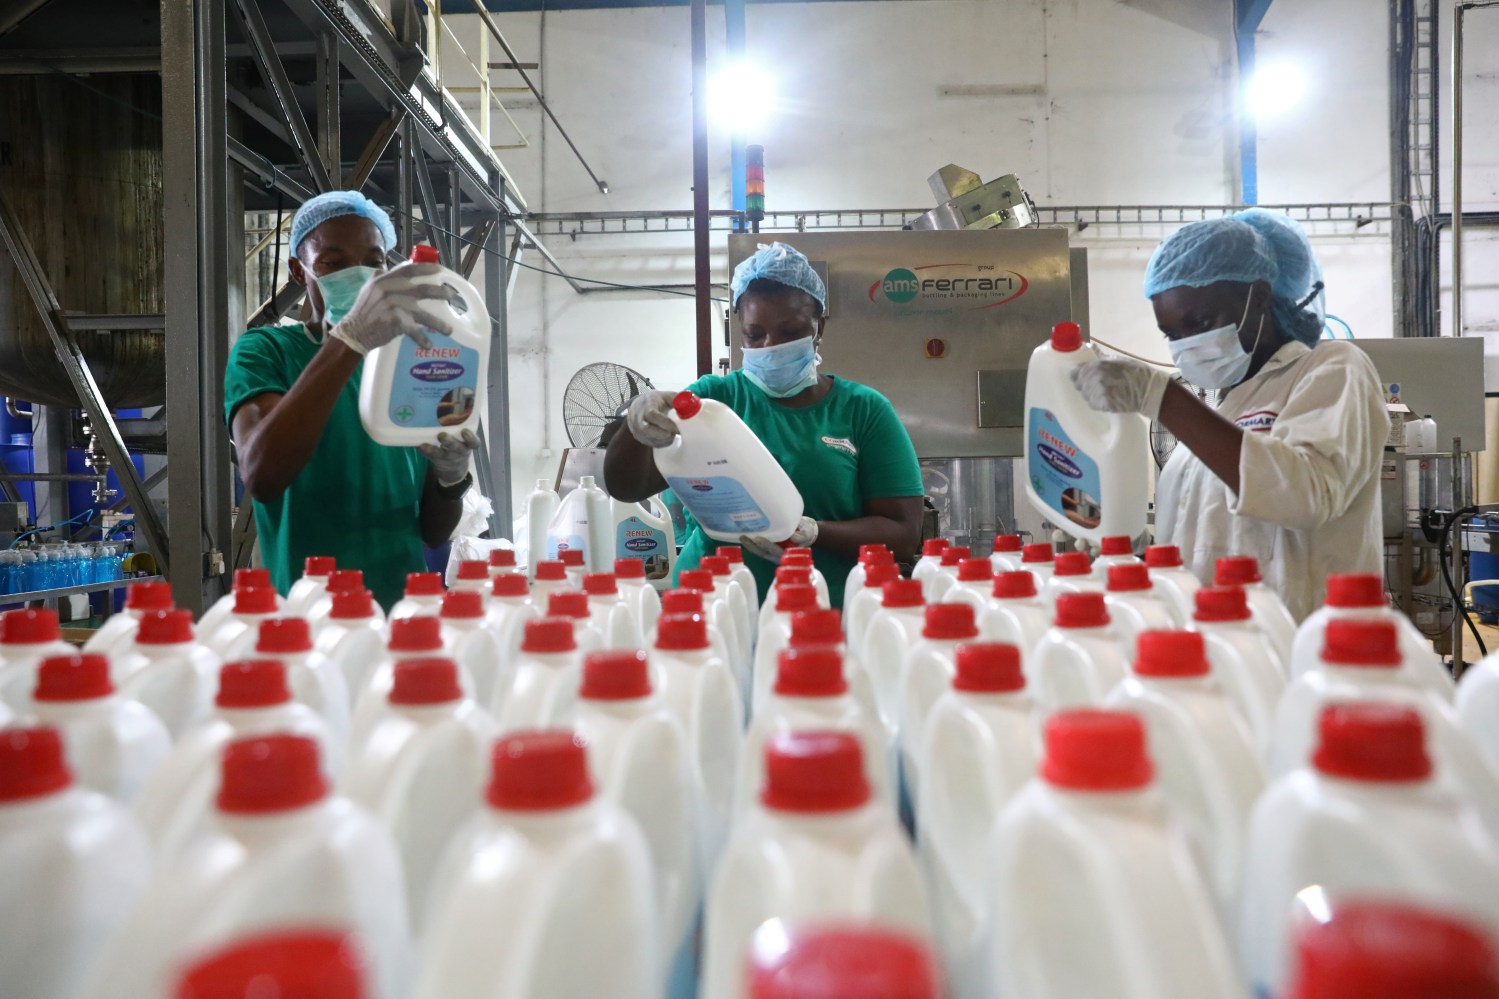 Employees inspect the production of hand sanitizers in Cormart factory as the company steps up production of hand sanitizers to prevent the spread of coronavirus disease (COVID-19), on the outskirts of Lagos, Nigeria March 19, 2020. Picture taken March 19, 2020. REUTERS/Temilade Adelaja